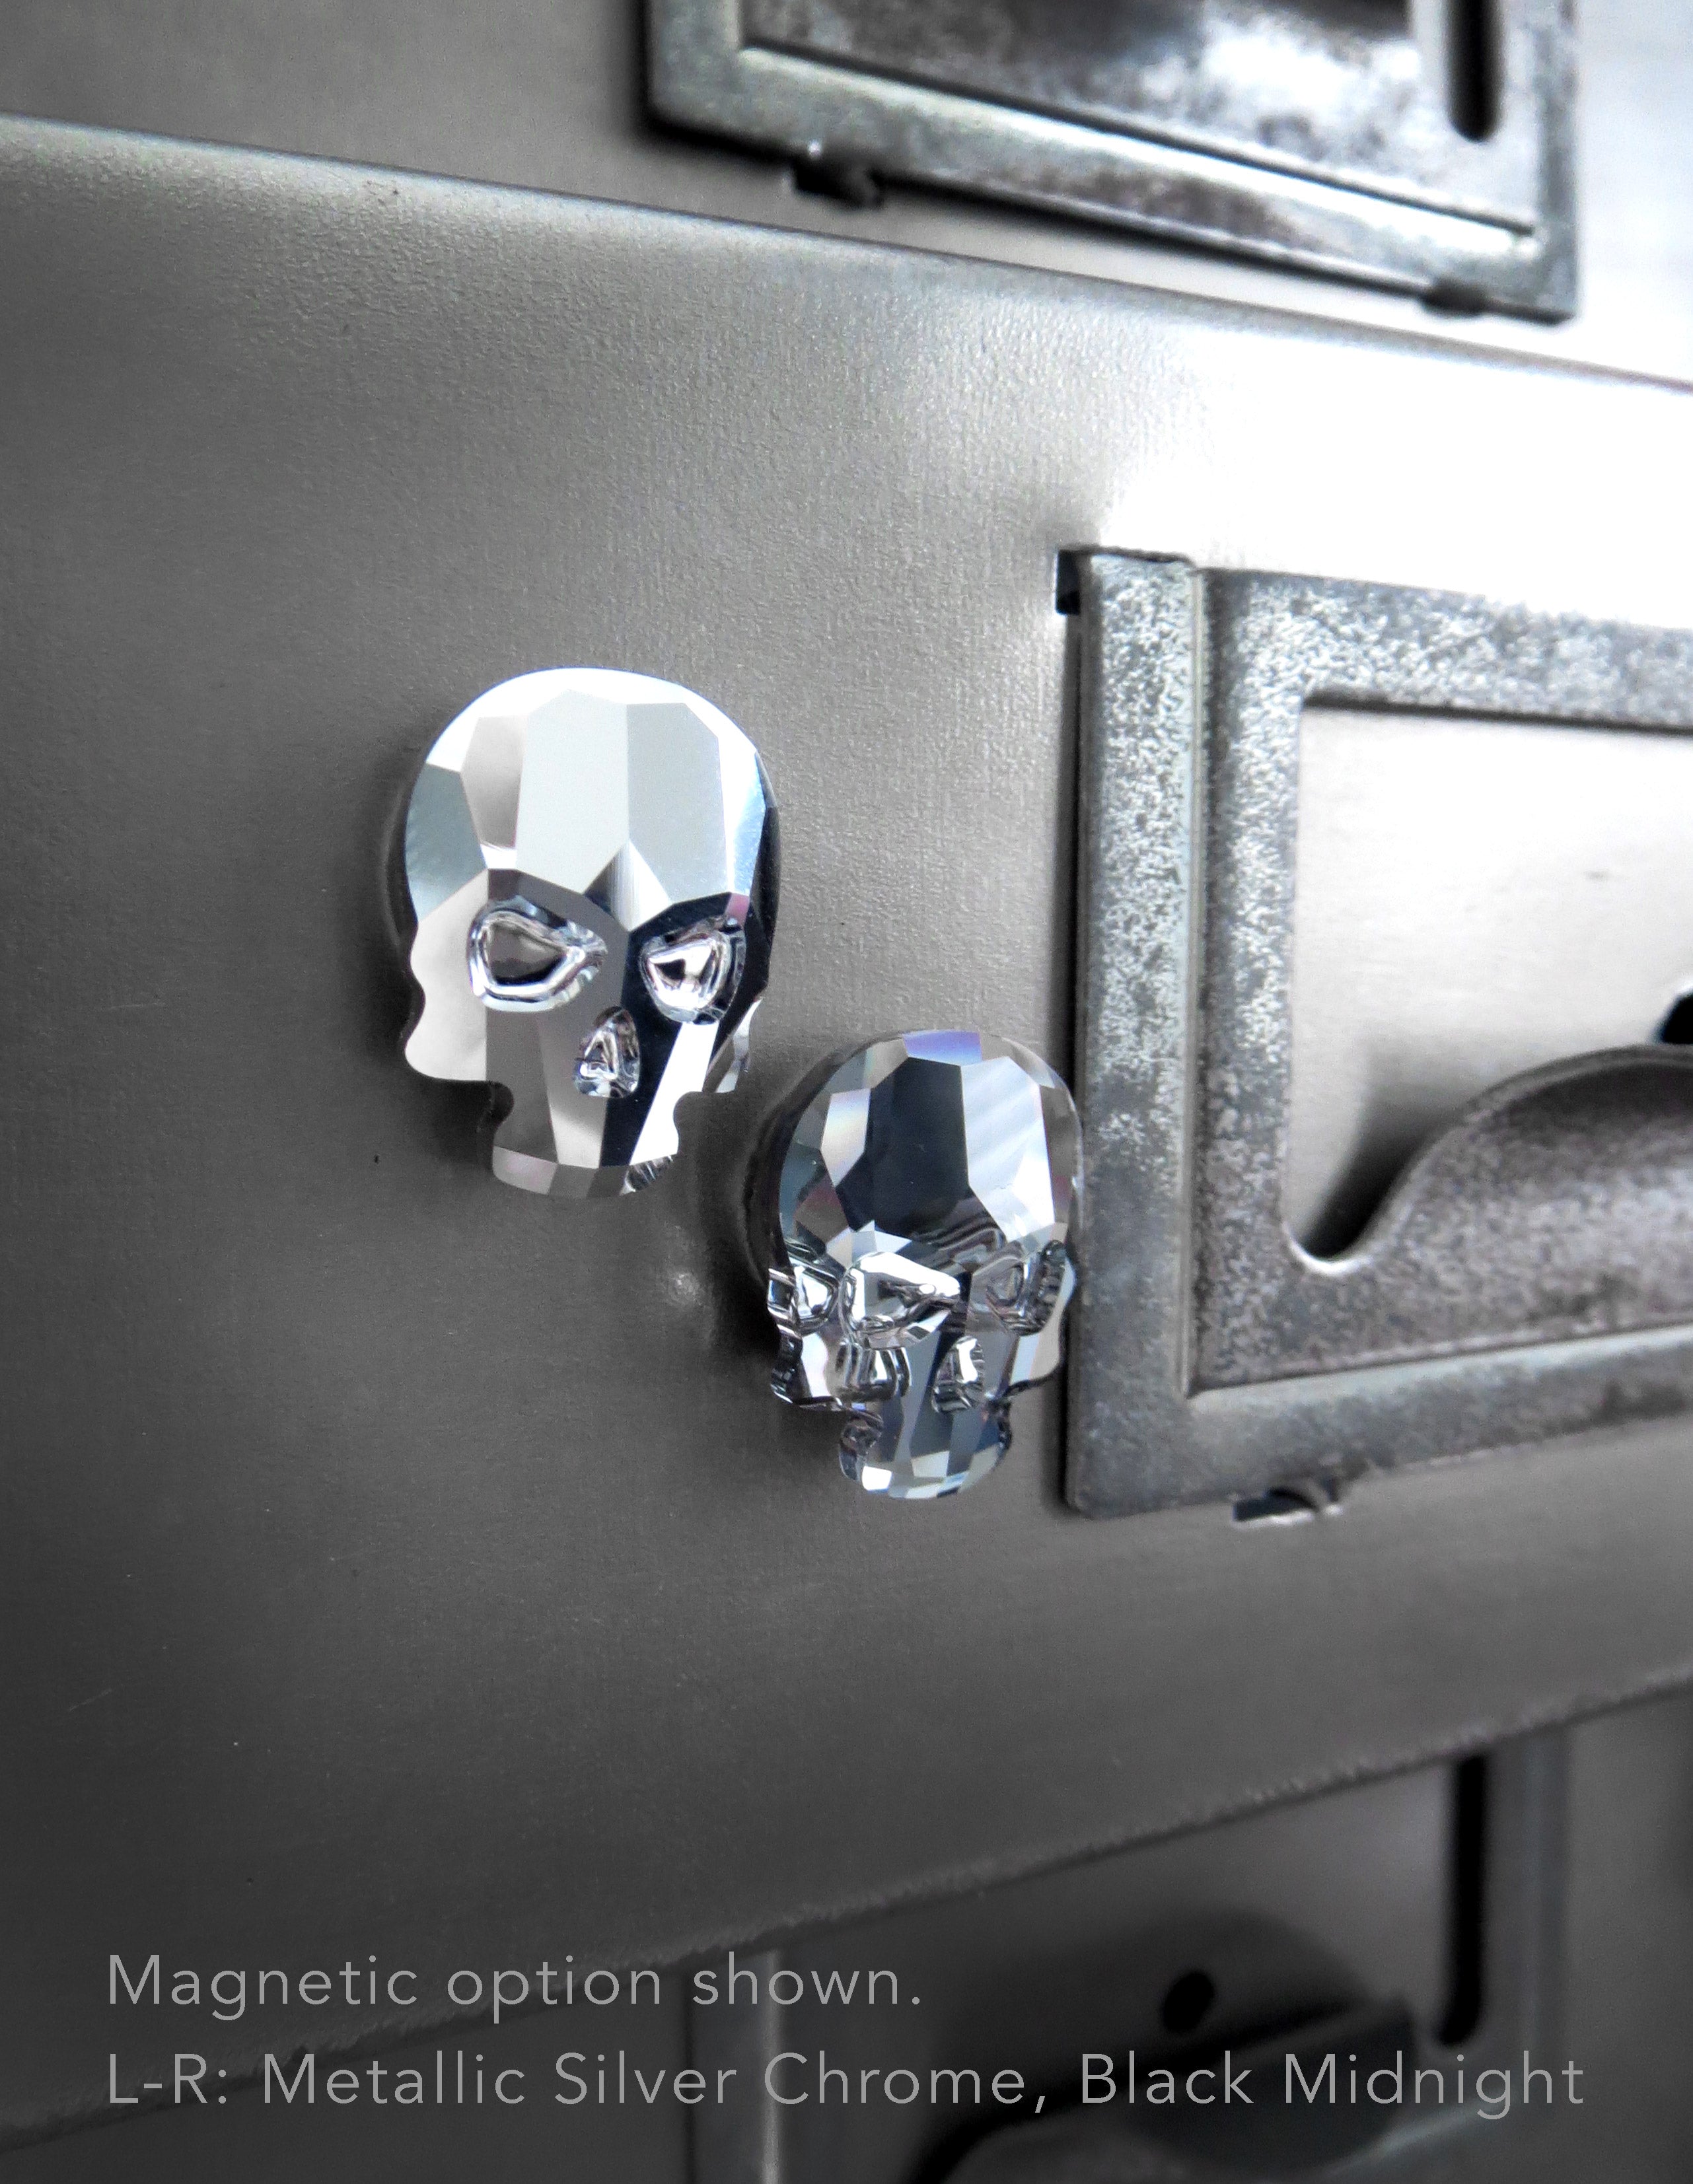 Small Crystal Silver Skull Pin or Magnet - Metallic Chrome